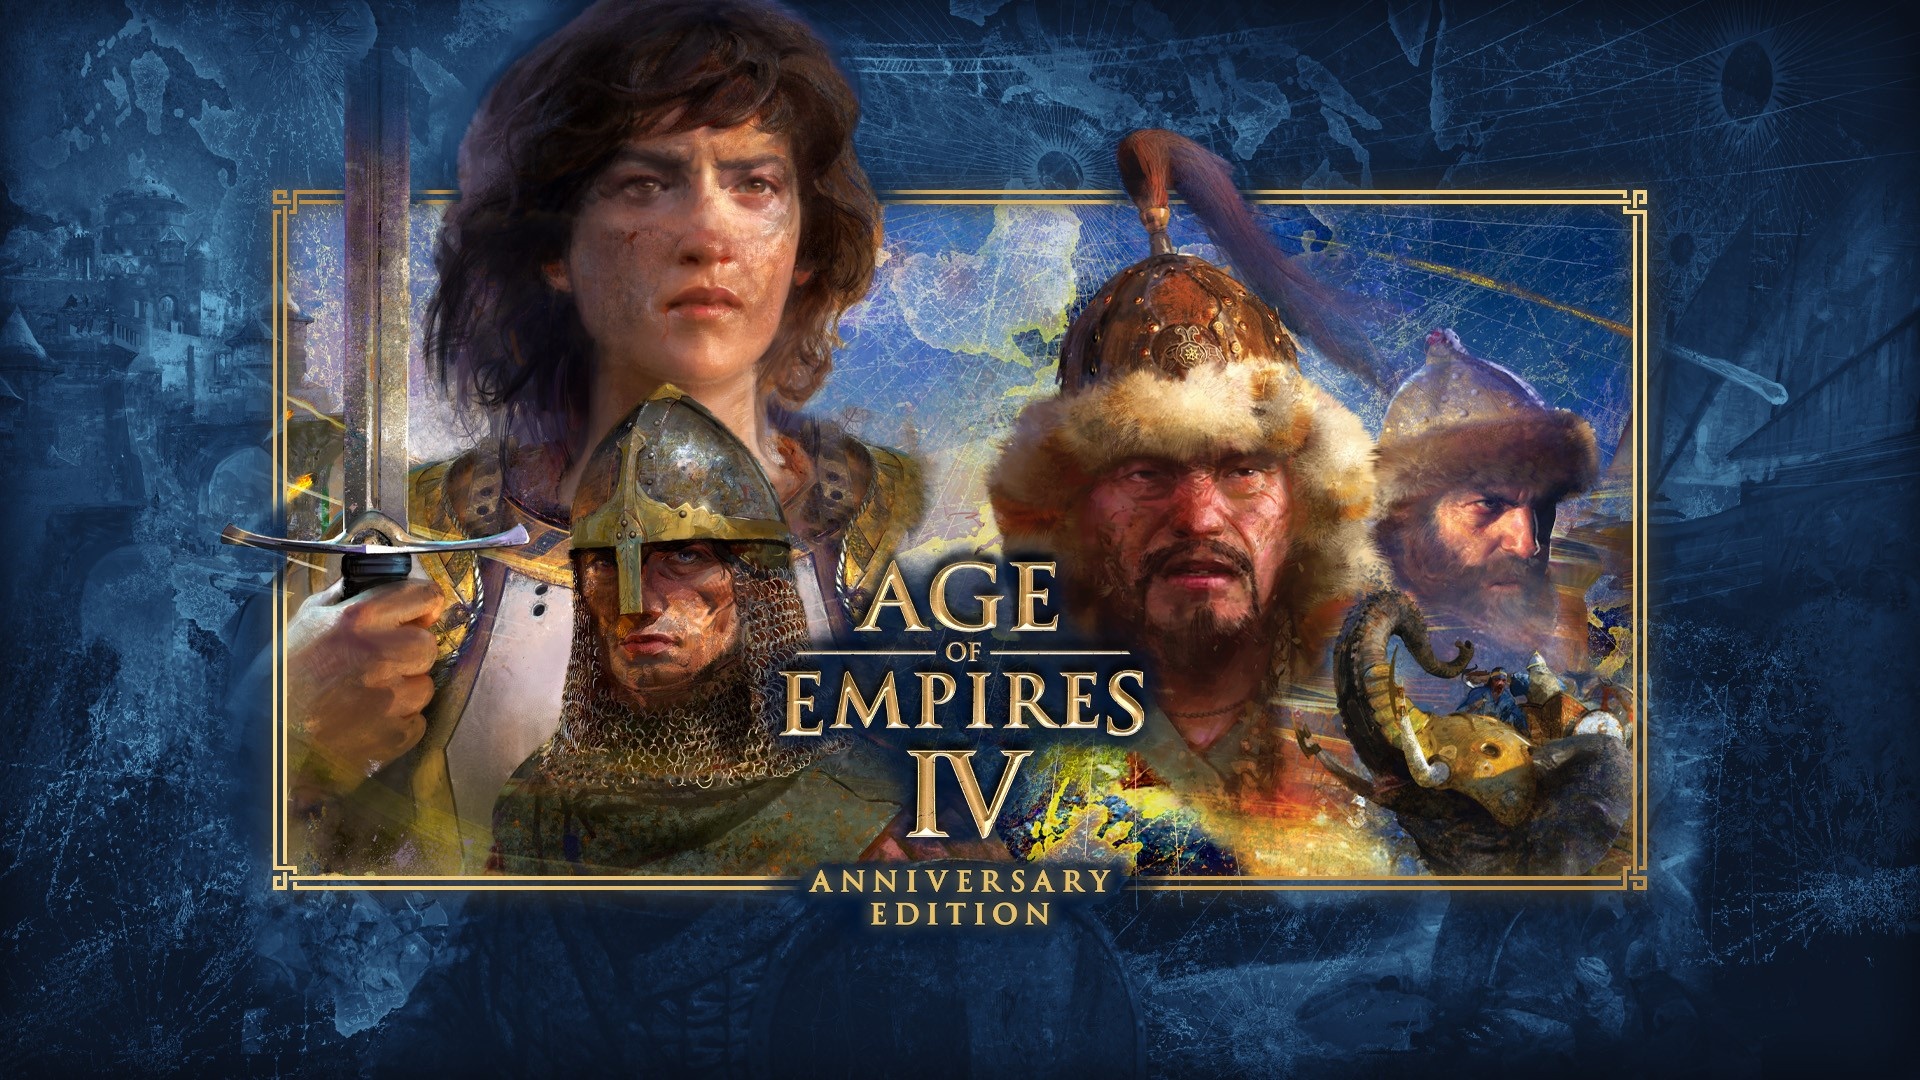 Video For Age of Empires Alle Sieger und Highlights des großen Red Bull Wololo: Legacy-Turniers